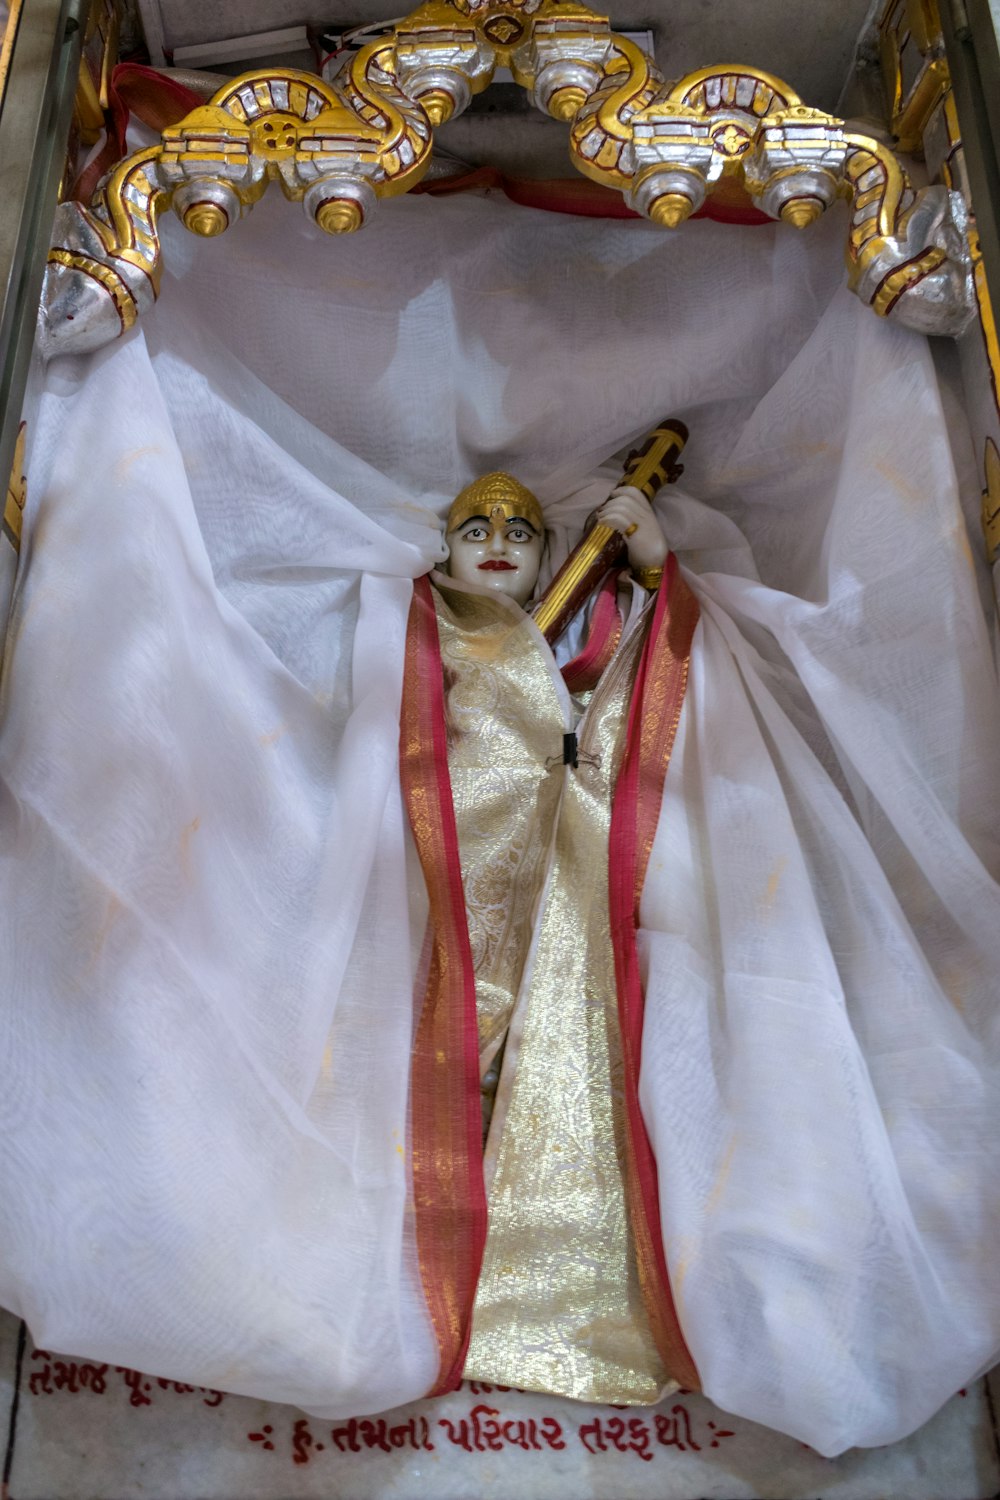 a statue of a person in a white and gold outfit